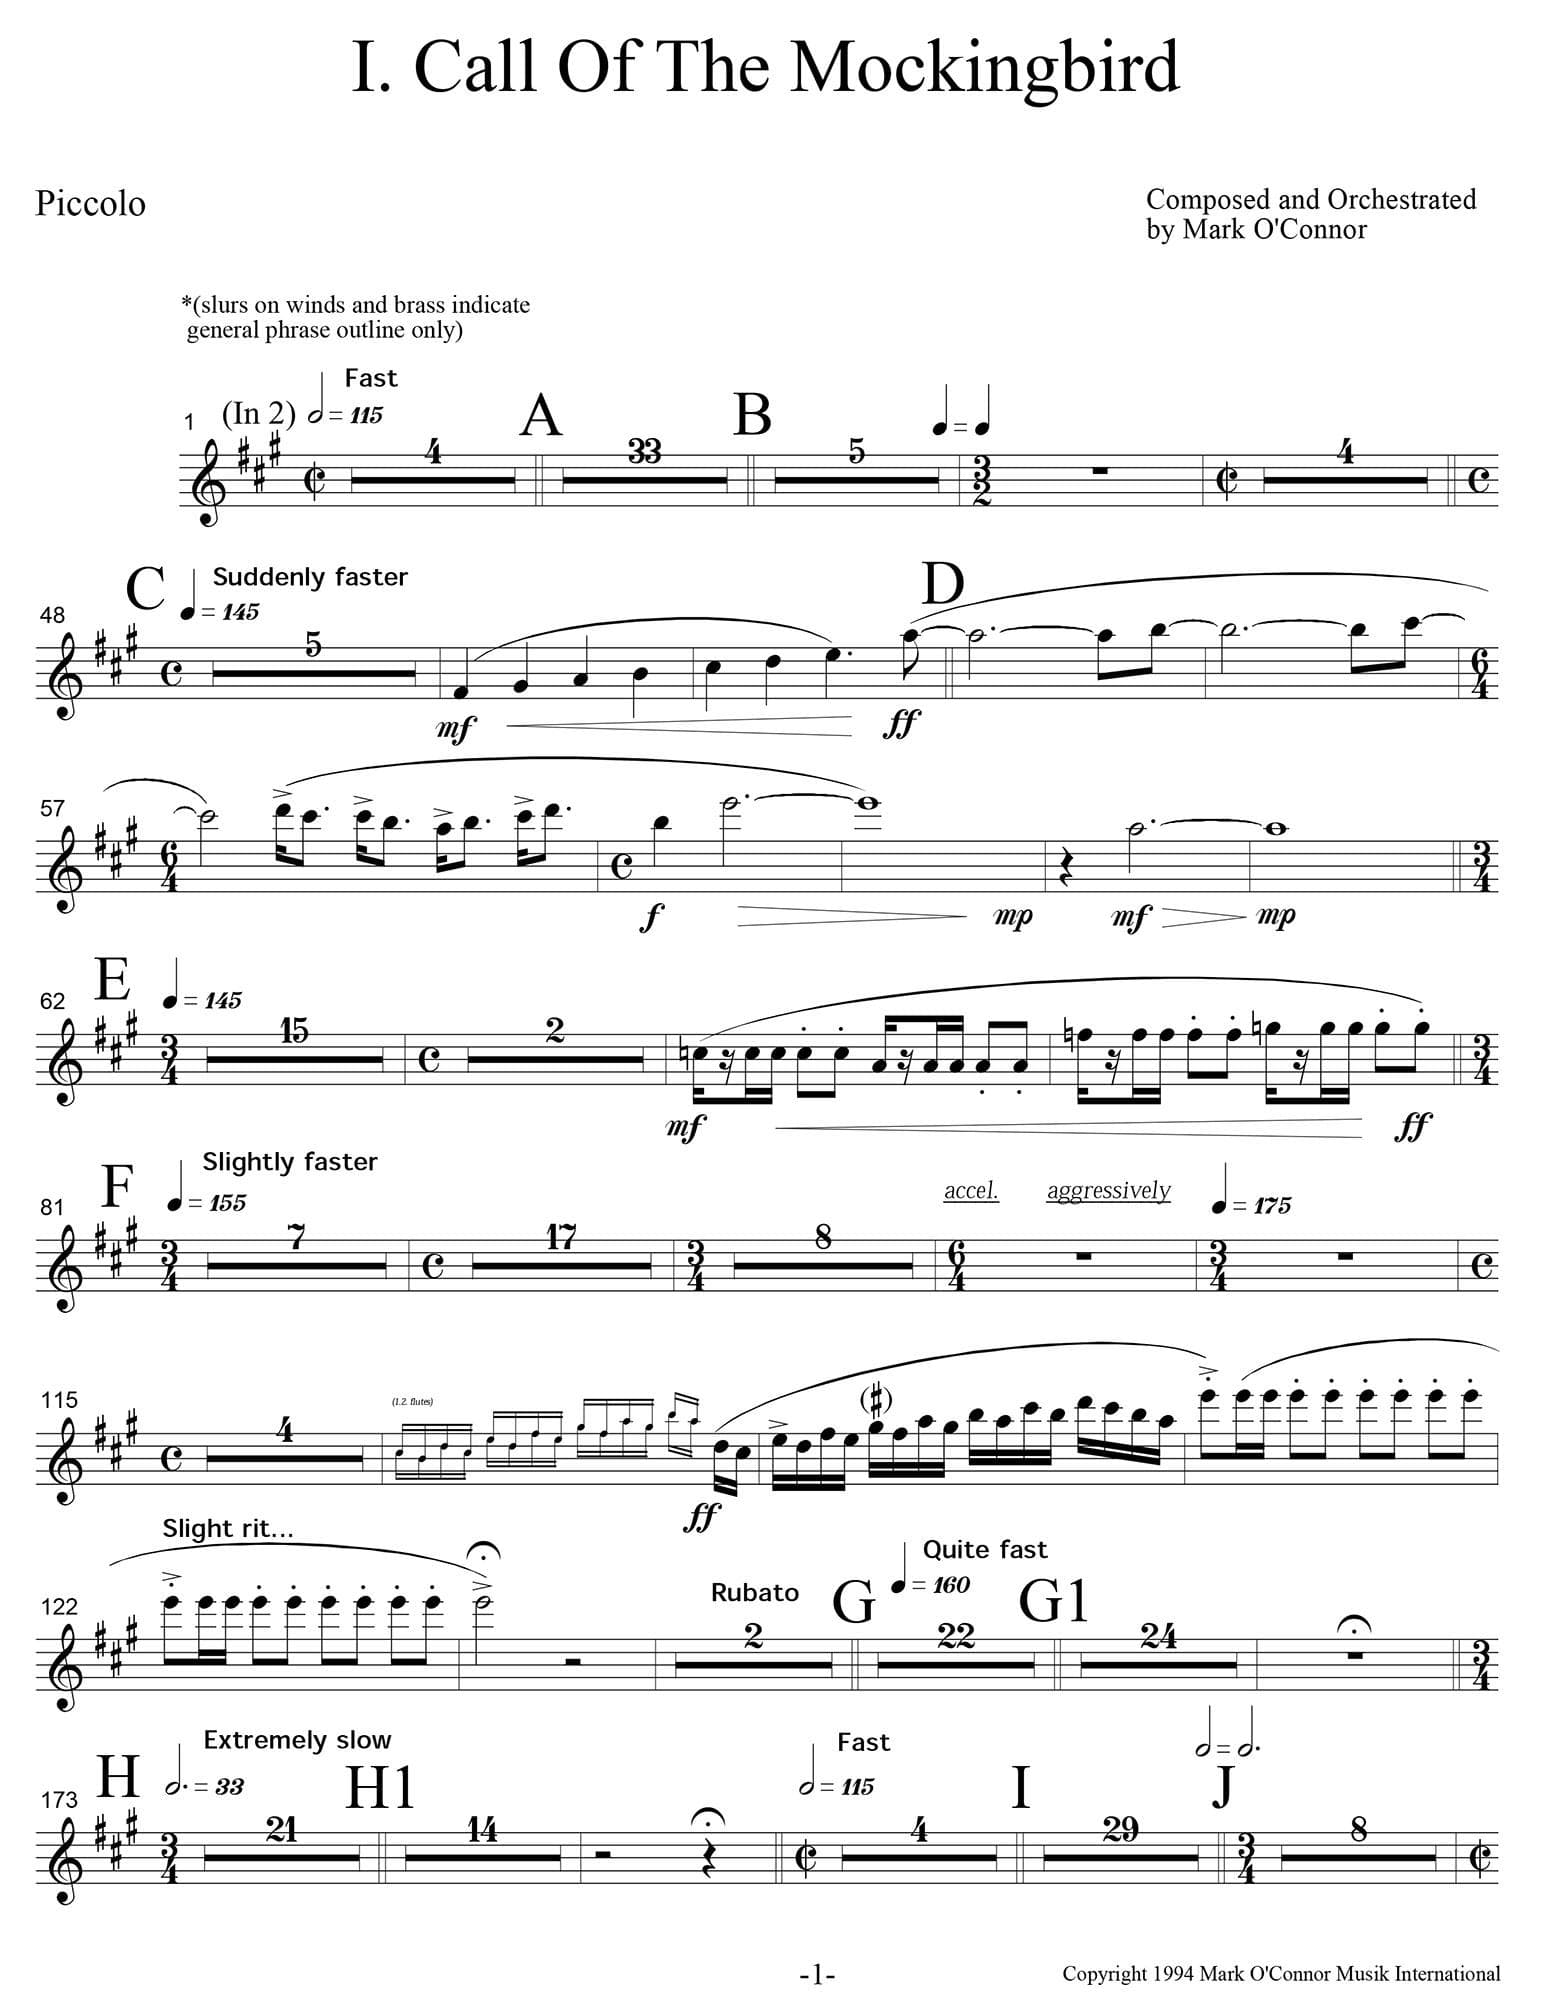 O'Connor, Mark - Three Pieces for Violin and Orchestra - Winds - Digital Download